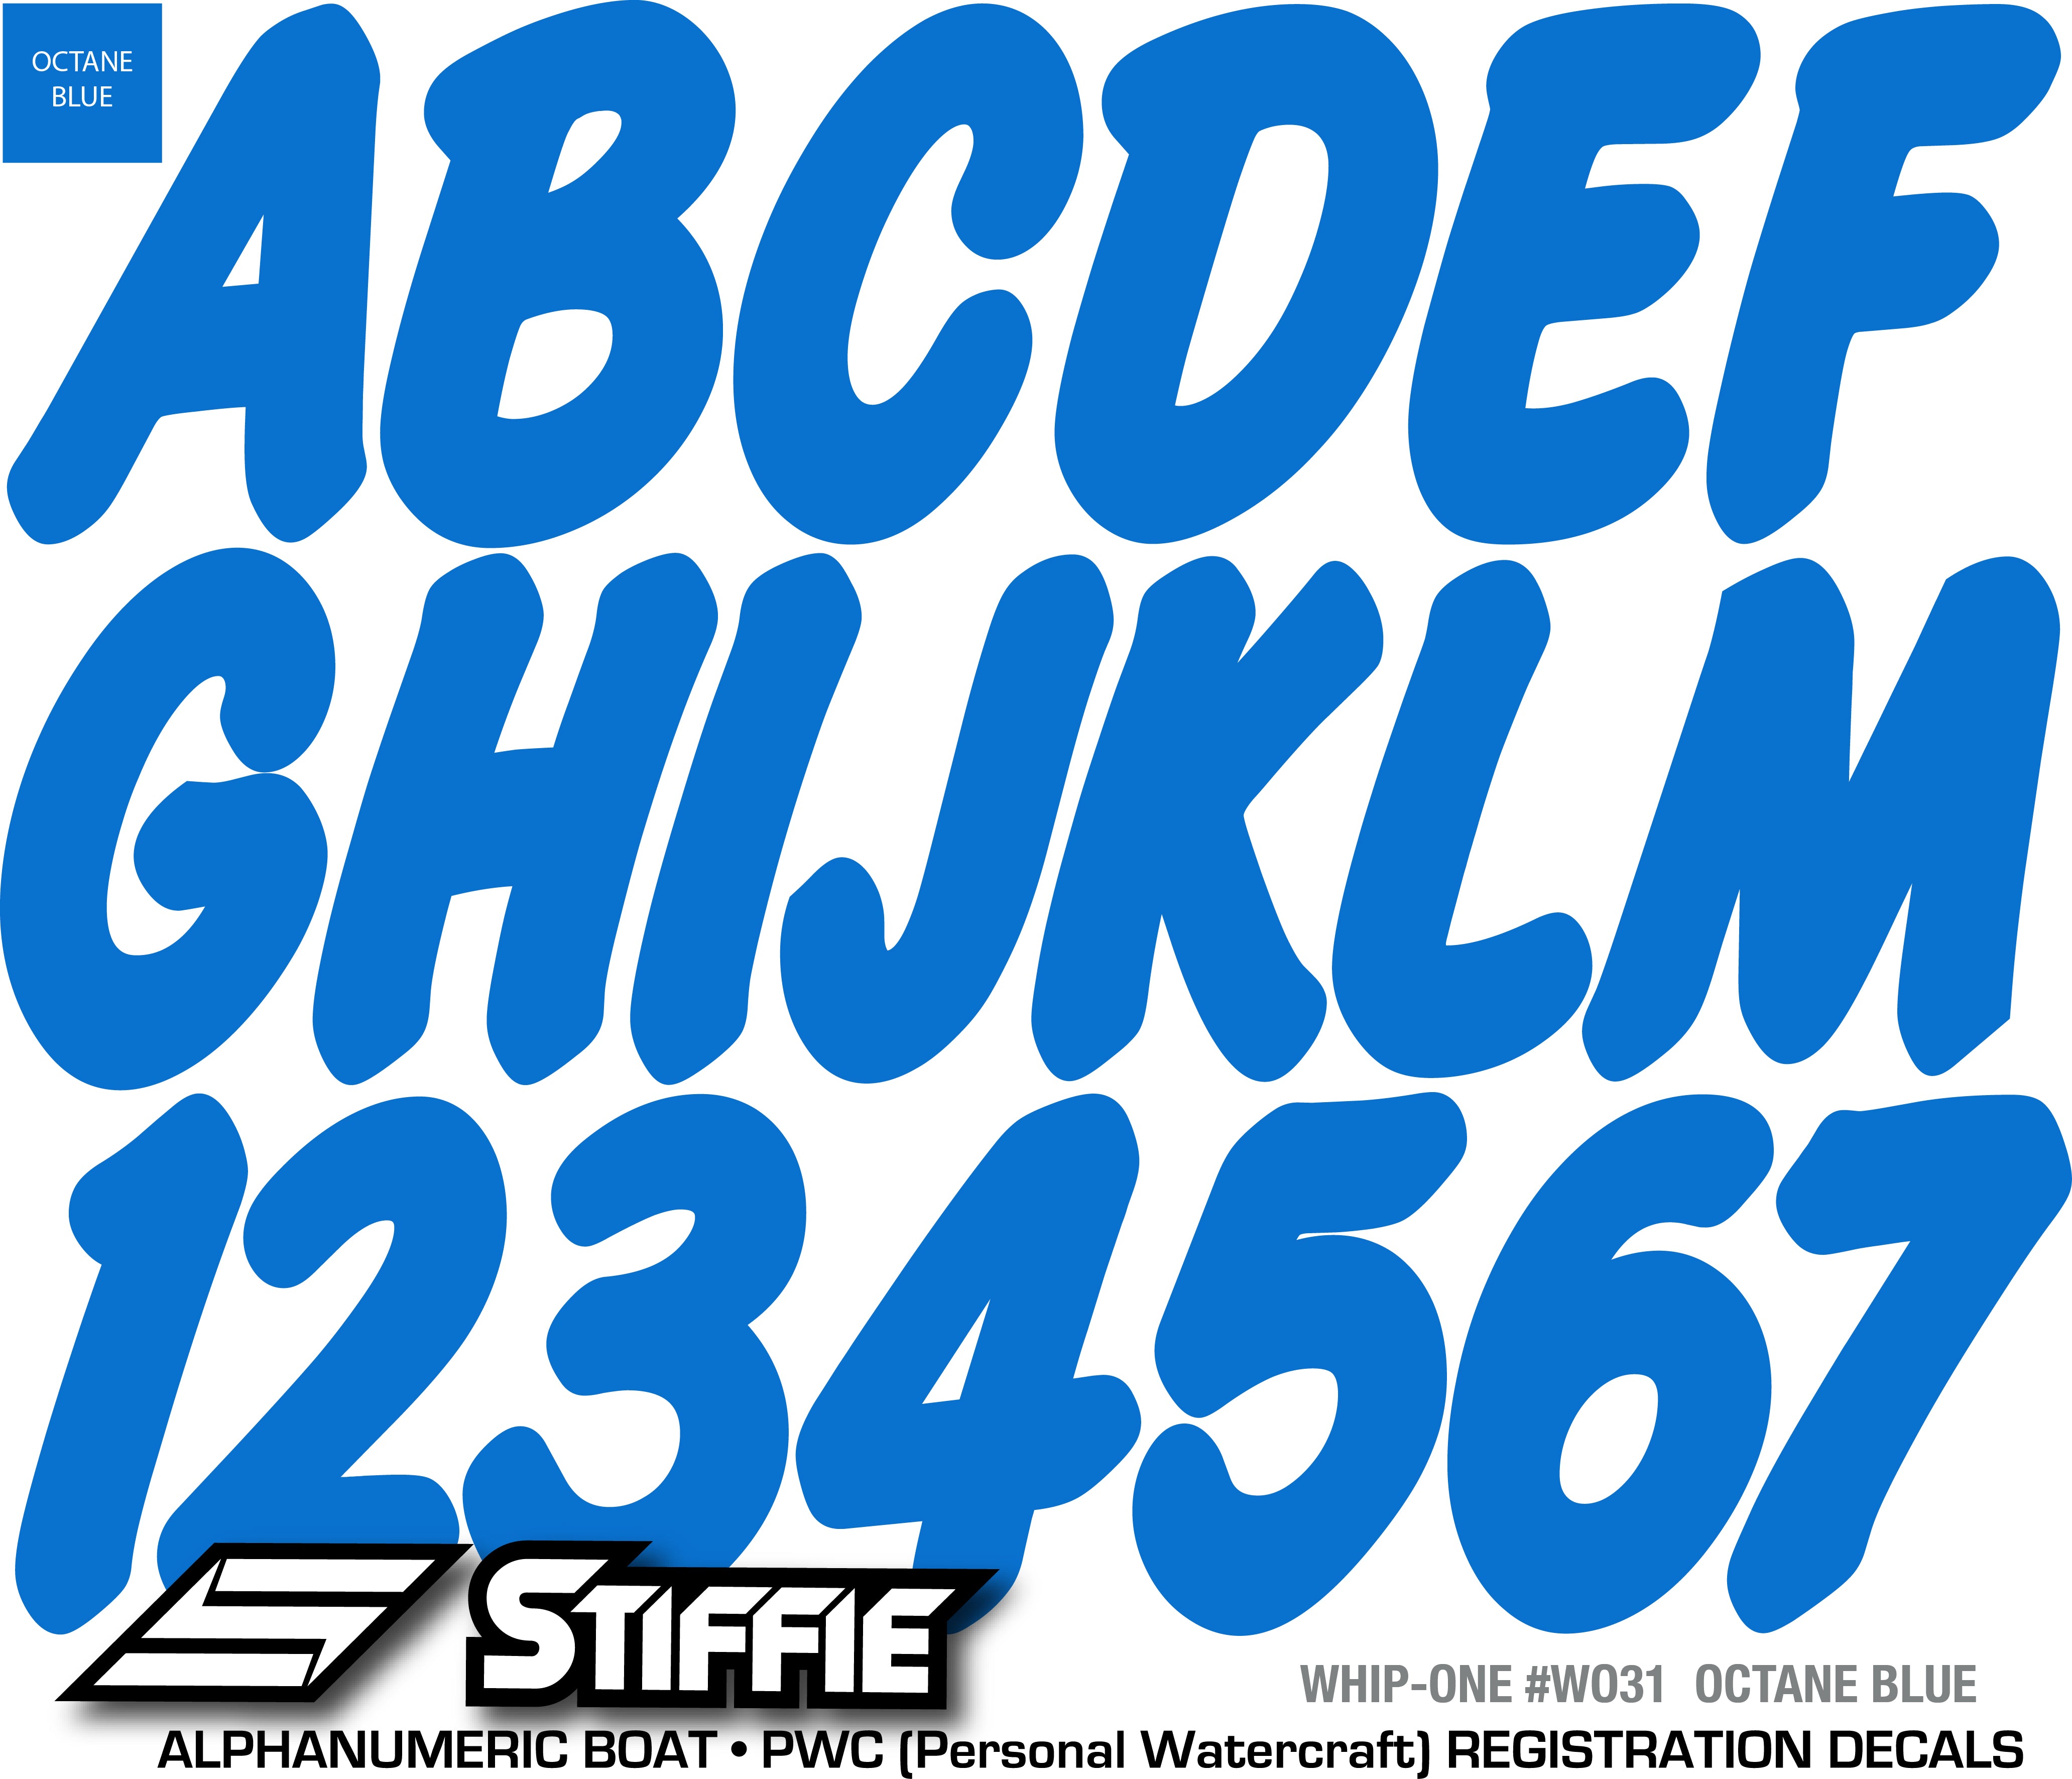 STIFFIE Whip-One Octane Blue 3" Alpha-Numeric Registration Identification Numbers Stickers Decals for Boats & Personal Watercraft